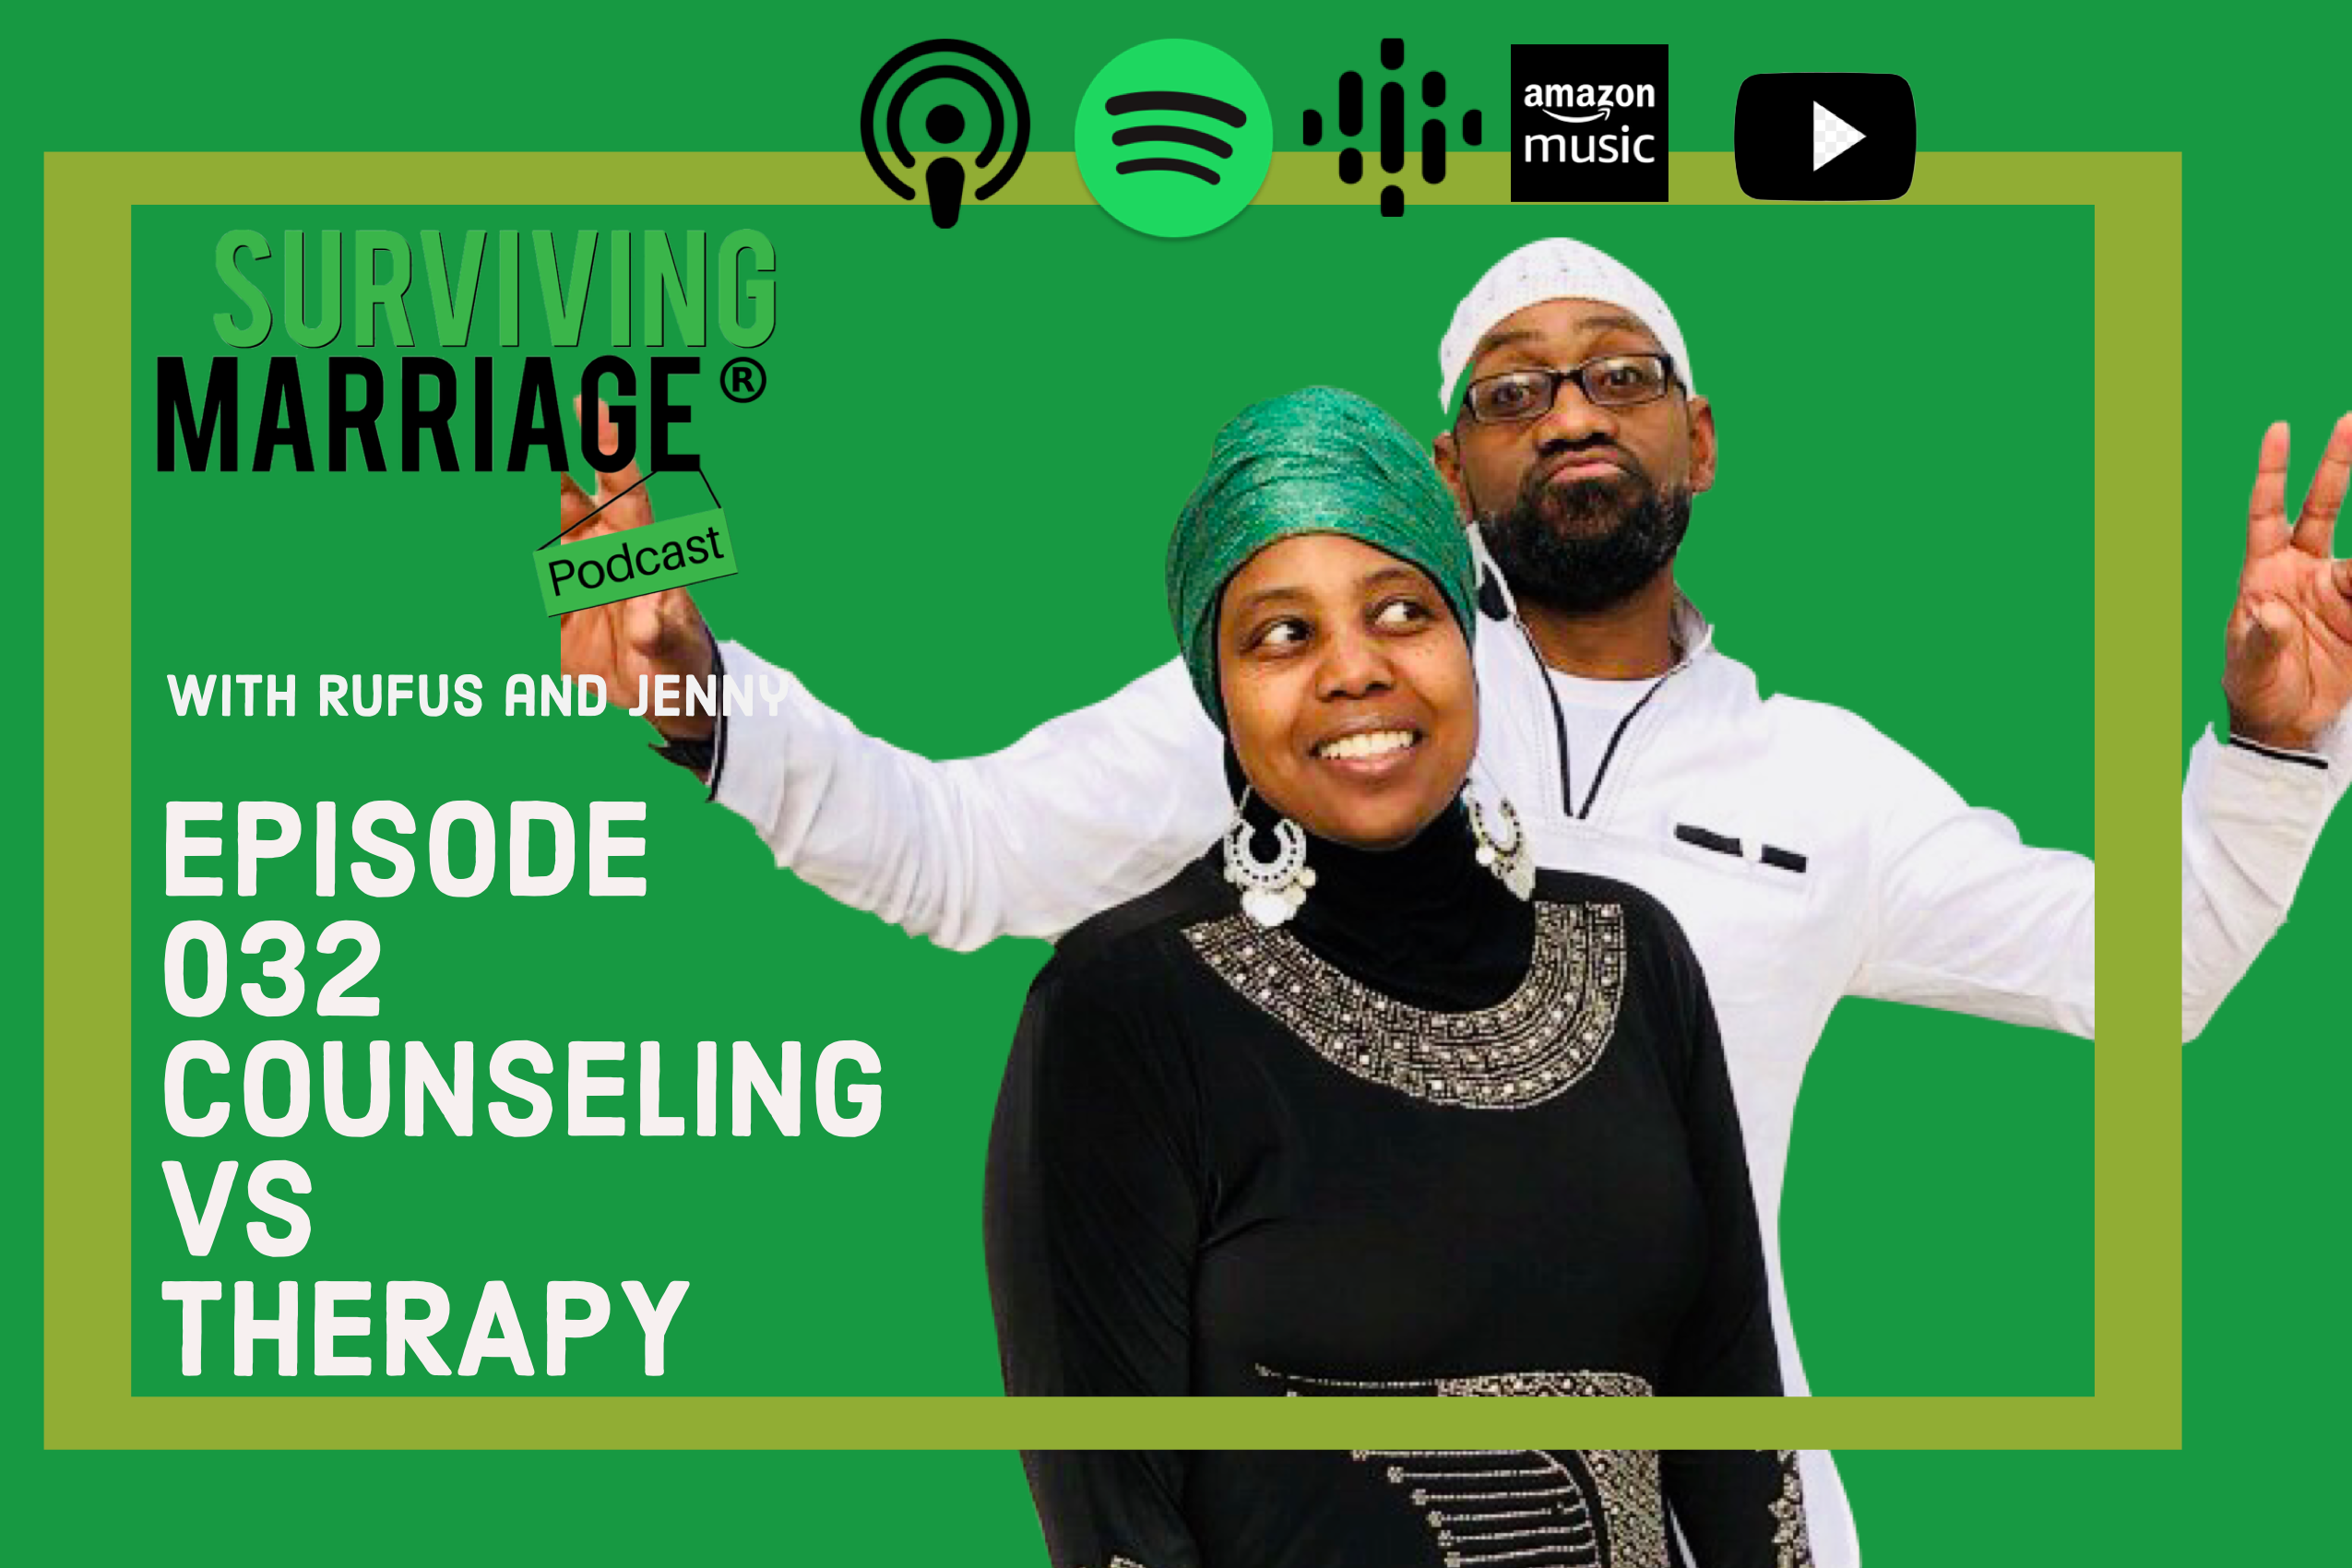 #SurvivingMarriage – Counseling vs Therapy